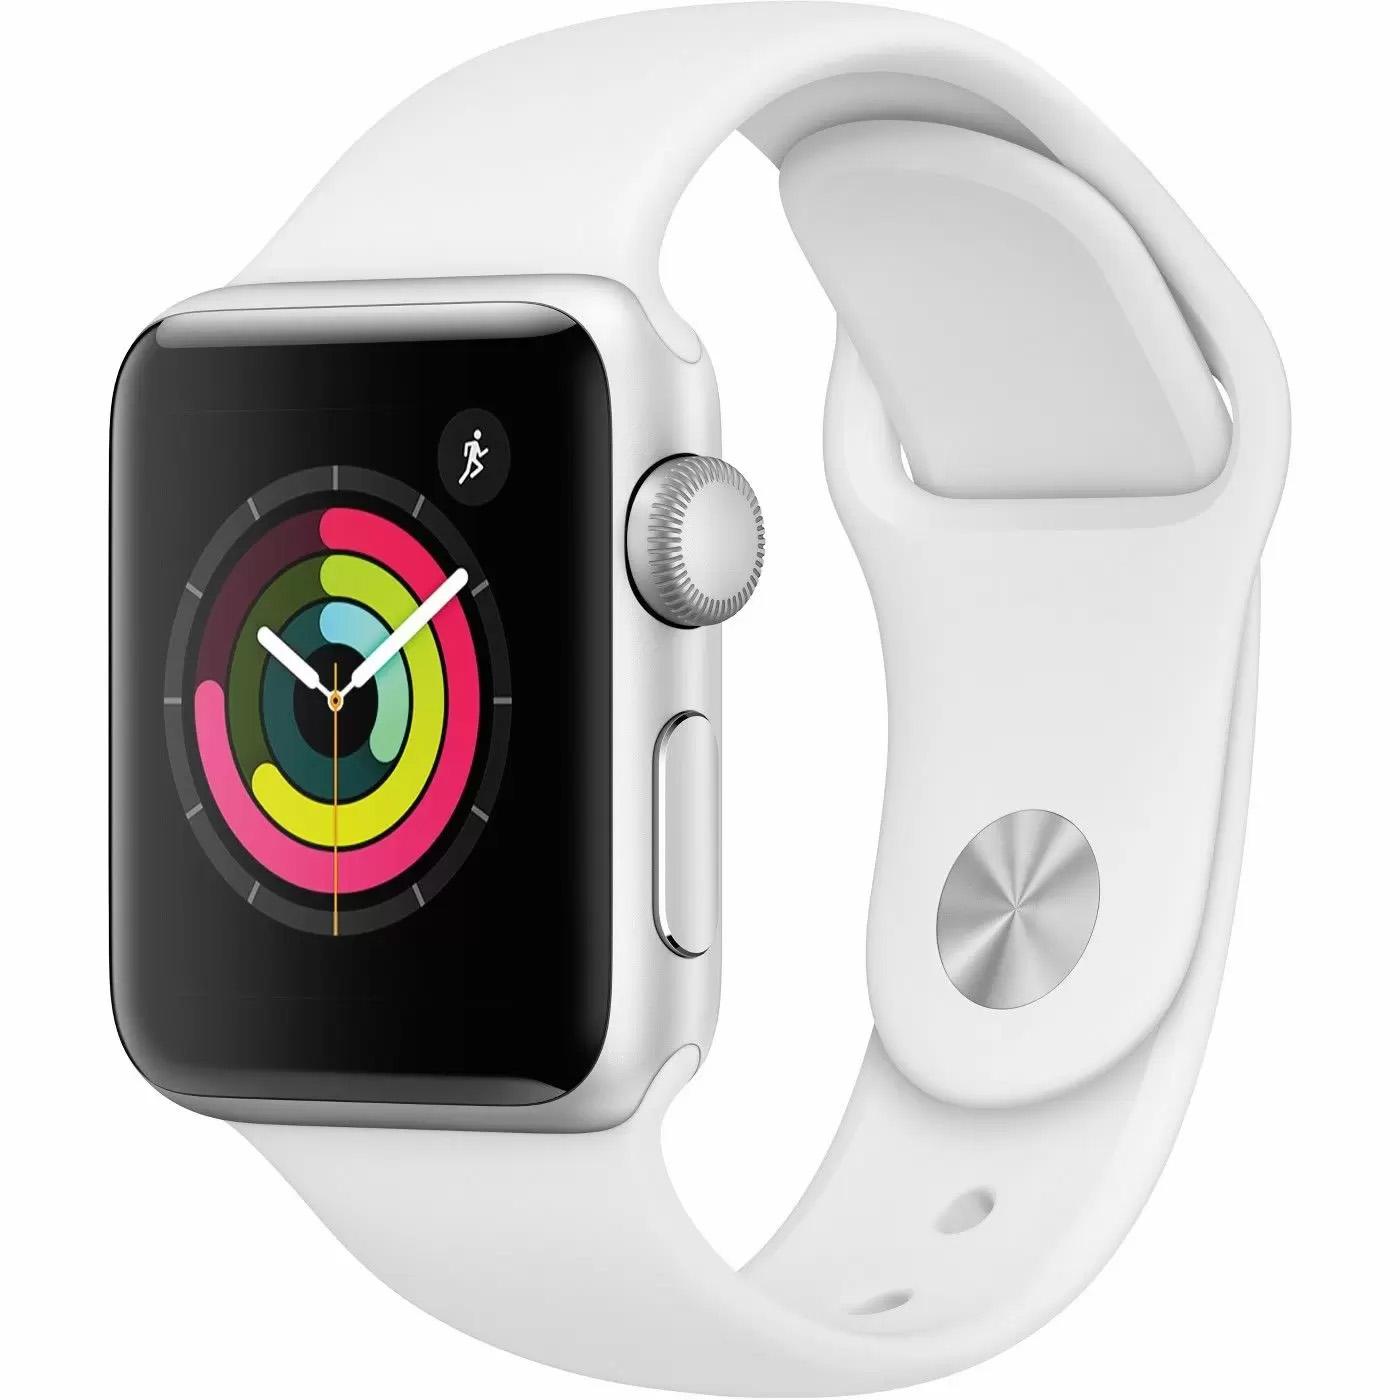 Apple Watch Series 3 38mm Silver Aluminum Smartwatch for $169 Shipped